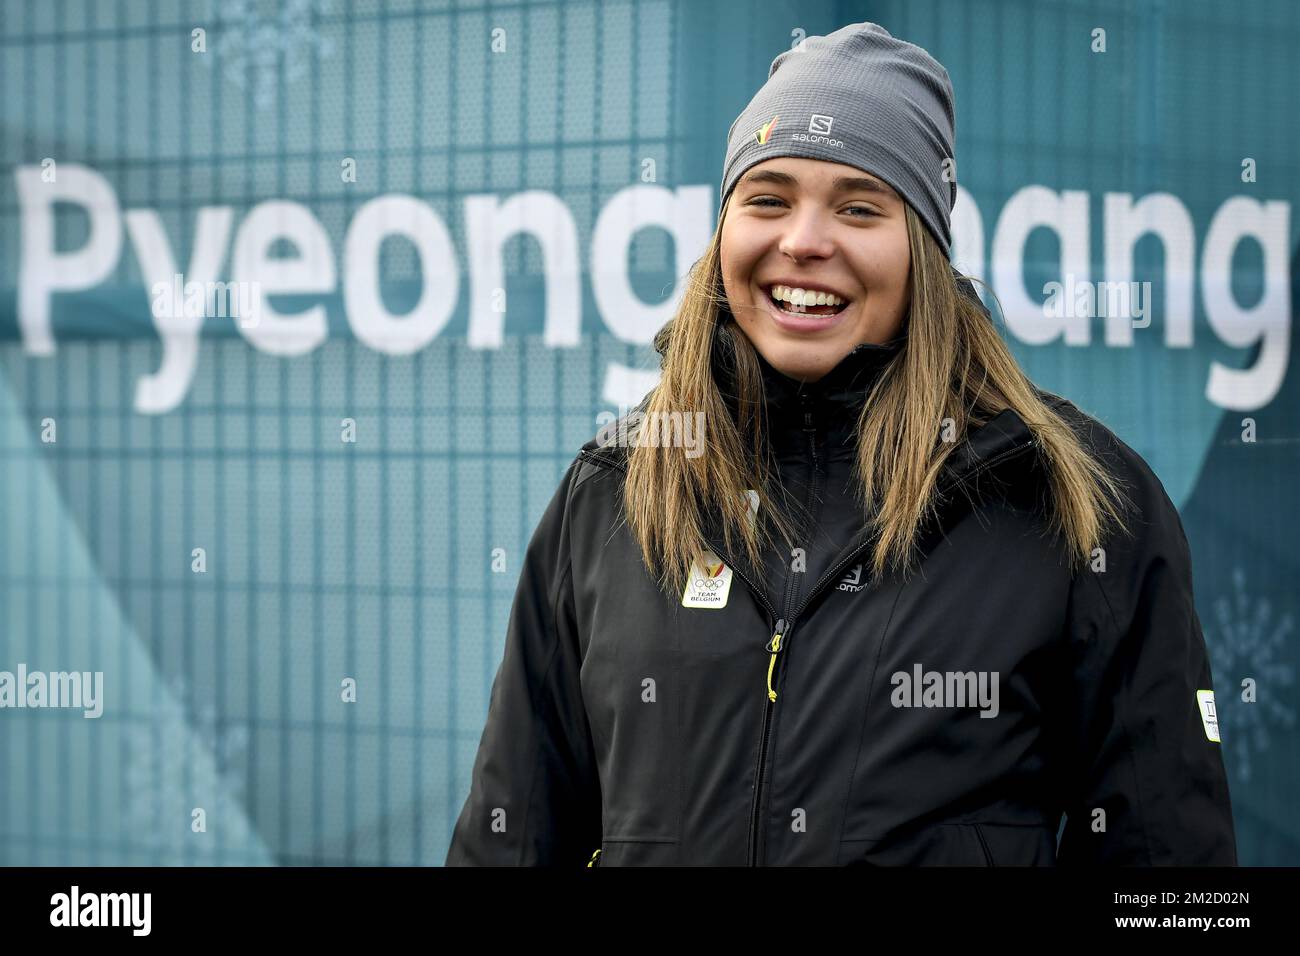 Belgian skier Kim Vanreusel pictured during a press meeting at the XXIII Olympic Winter Games, Saturday 10 February 2018, in Pyeongchang, South Korea. The Winter Olympics are taking place from 9 February to 25 February in Pyeongchang County, South Korea. BELGA PHOTO DIRK WAEM Stock Photo